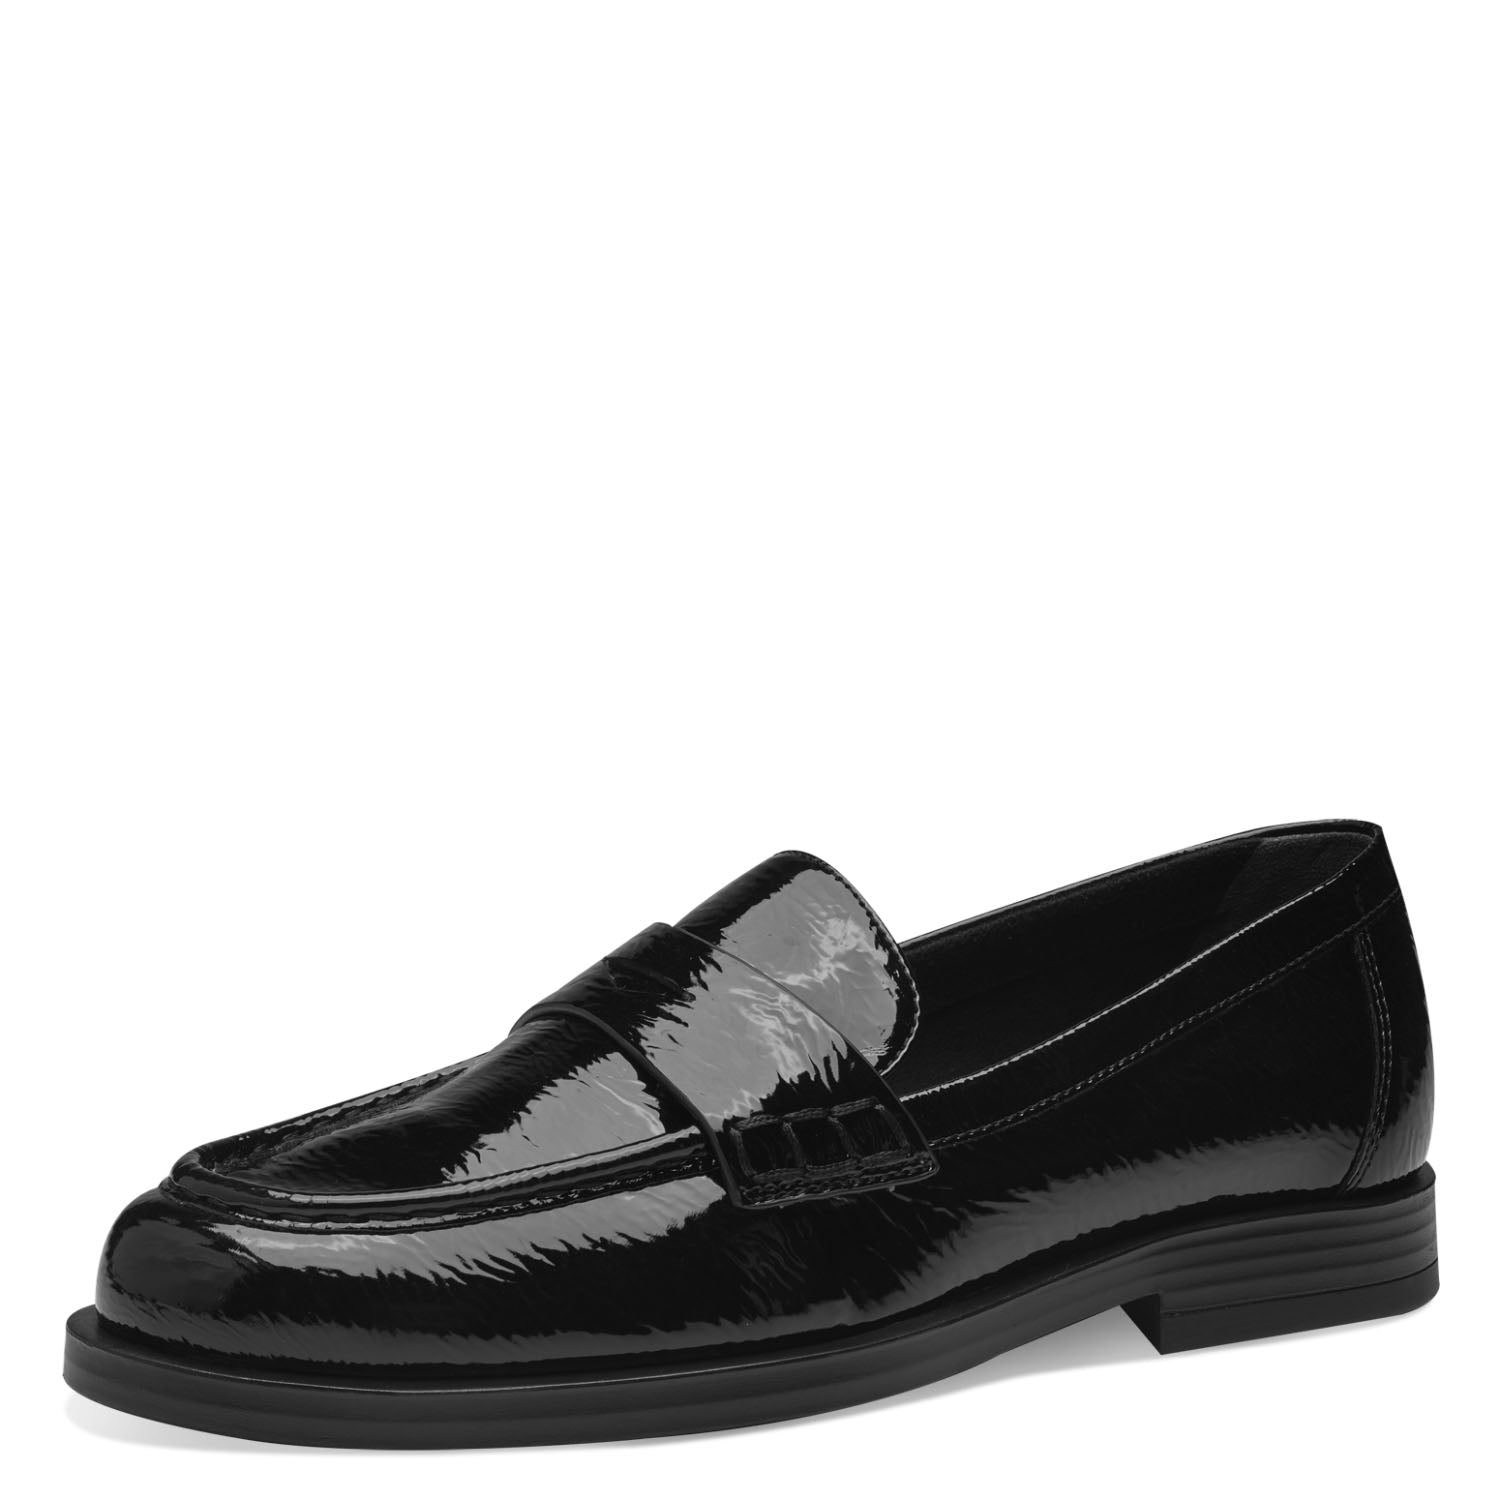 Angled view of the plain black patent loafer